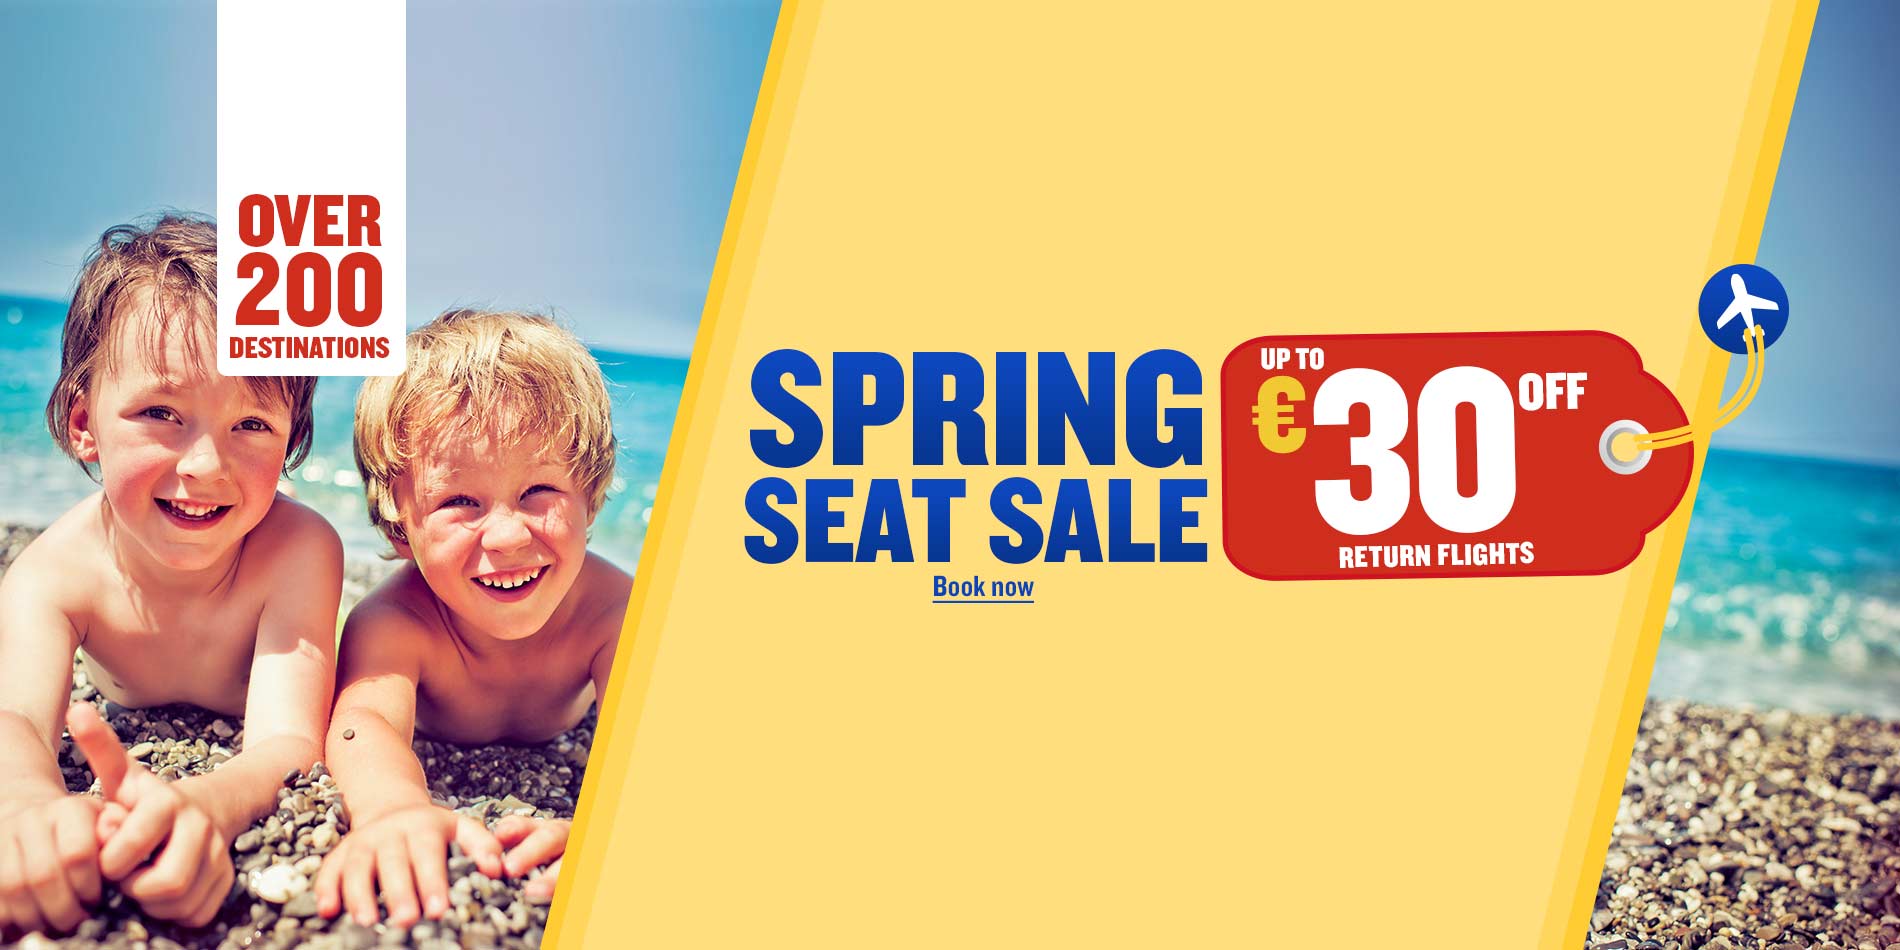 Ryanair Launches Massive Spring Seat Sale